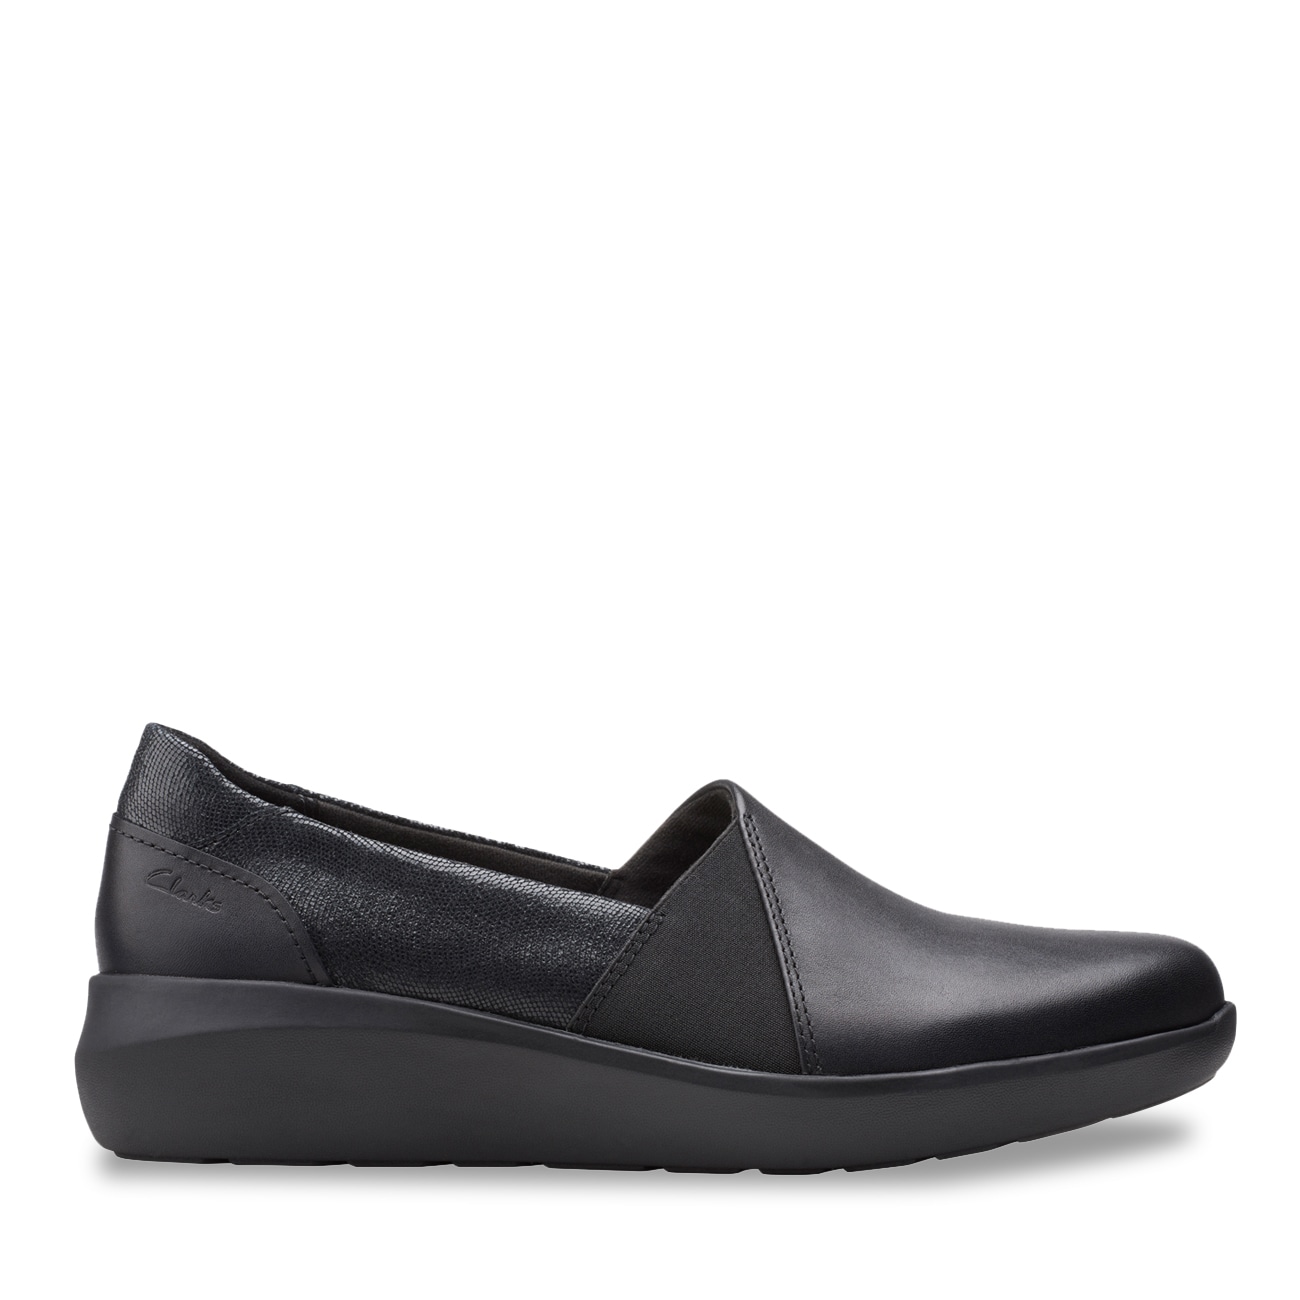 clarks extra wide shoes canada